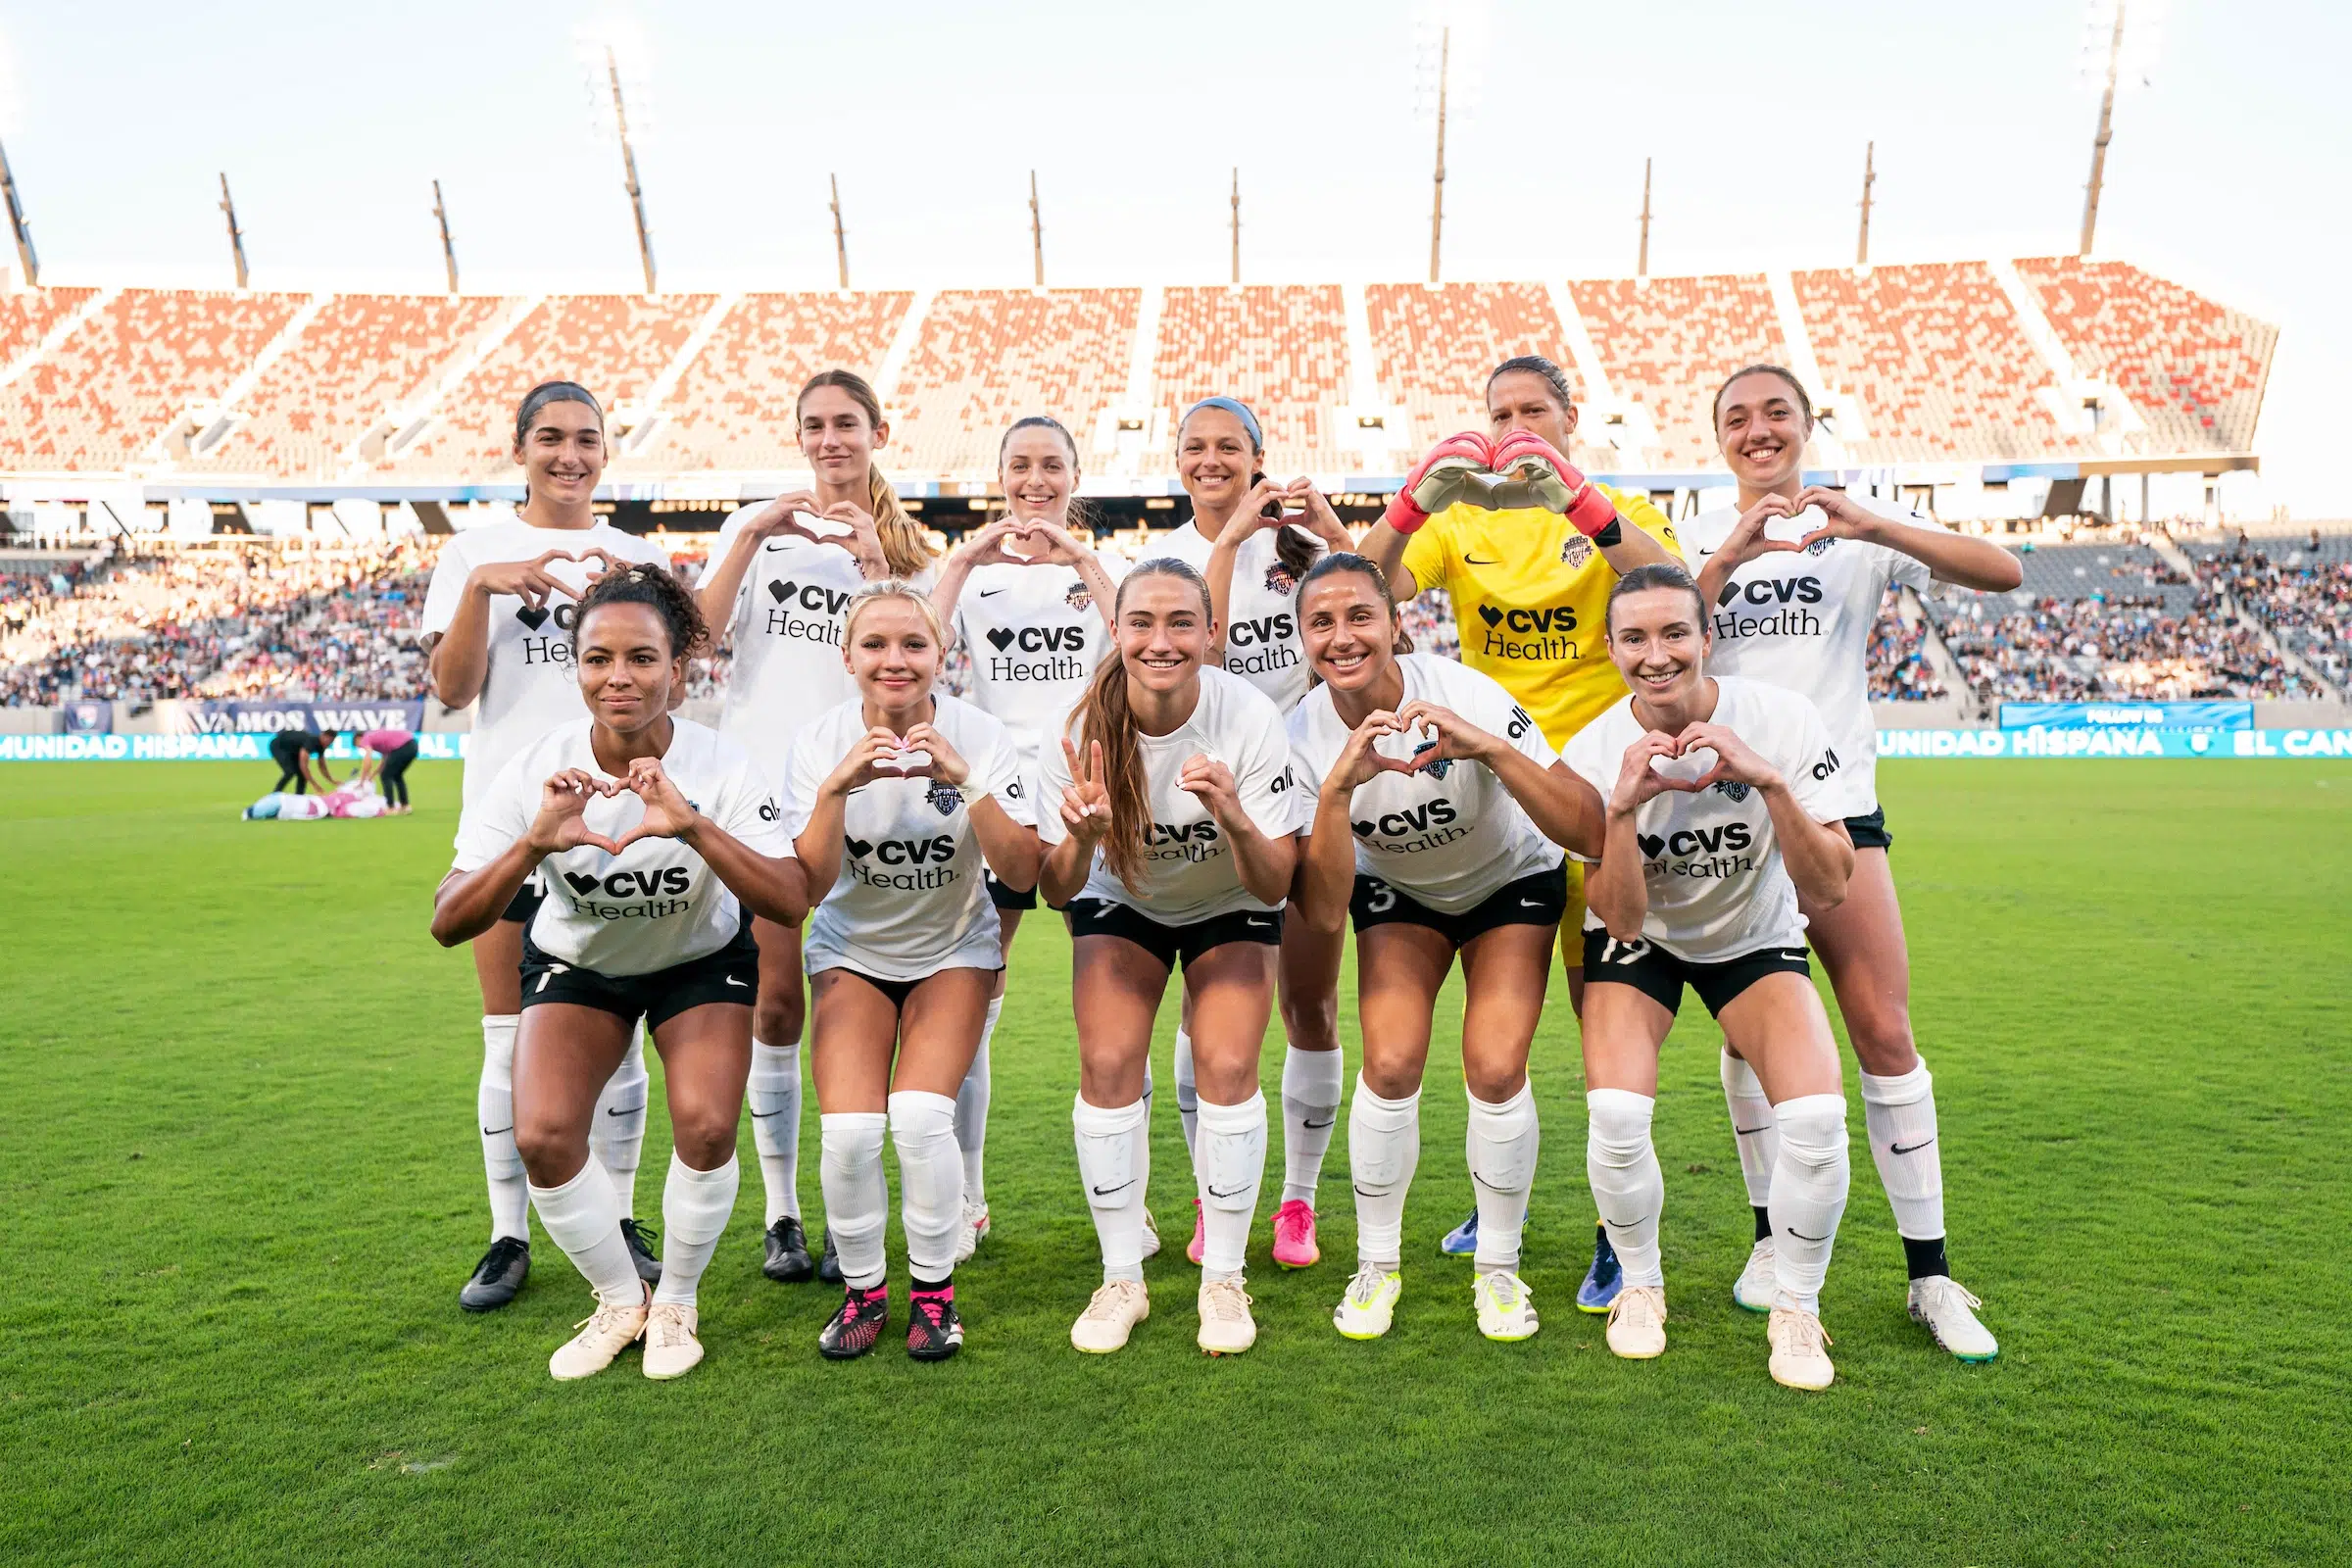 Ten soccer players in white uniforms and one in a yellow uniform pose with their hands making hearts.